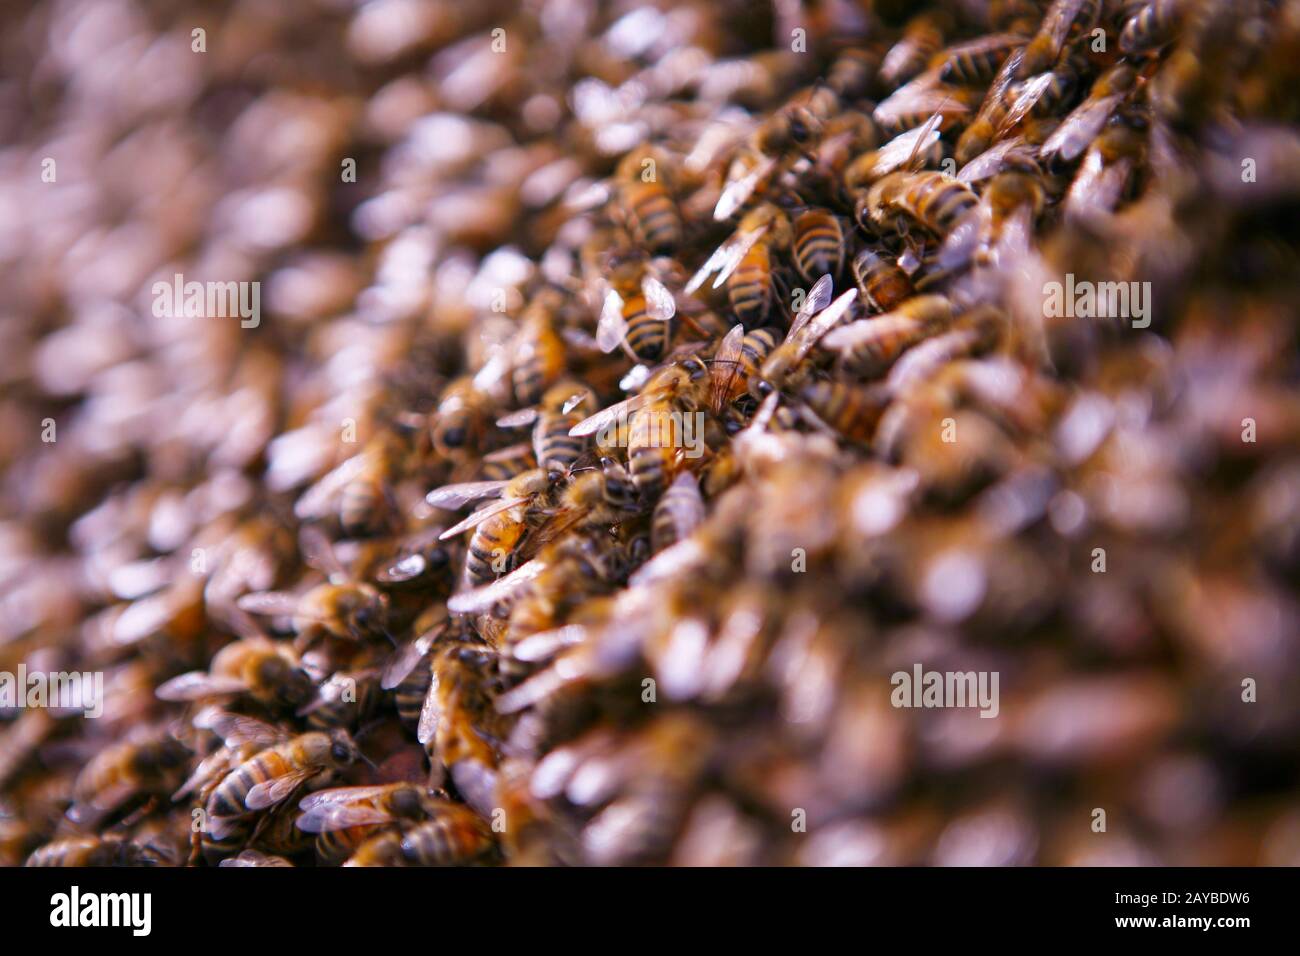 Bees walk over honeycomb in a hive Stock Photo